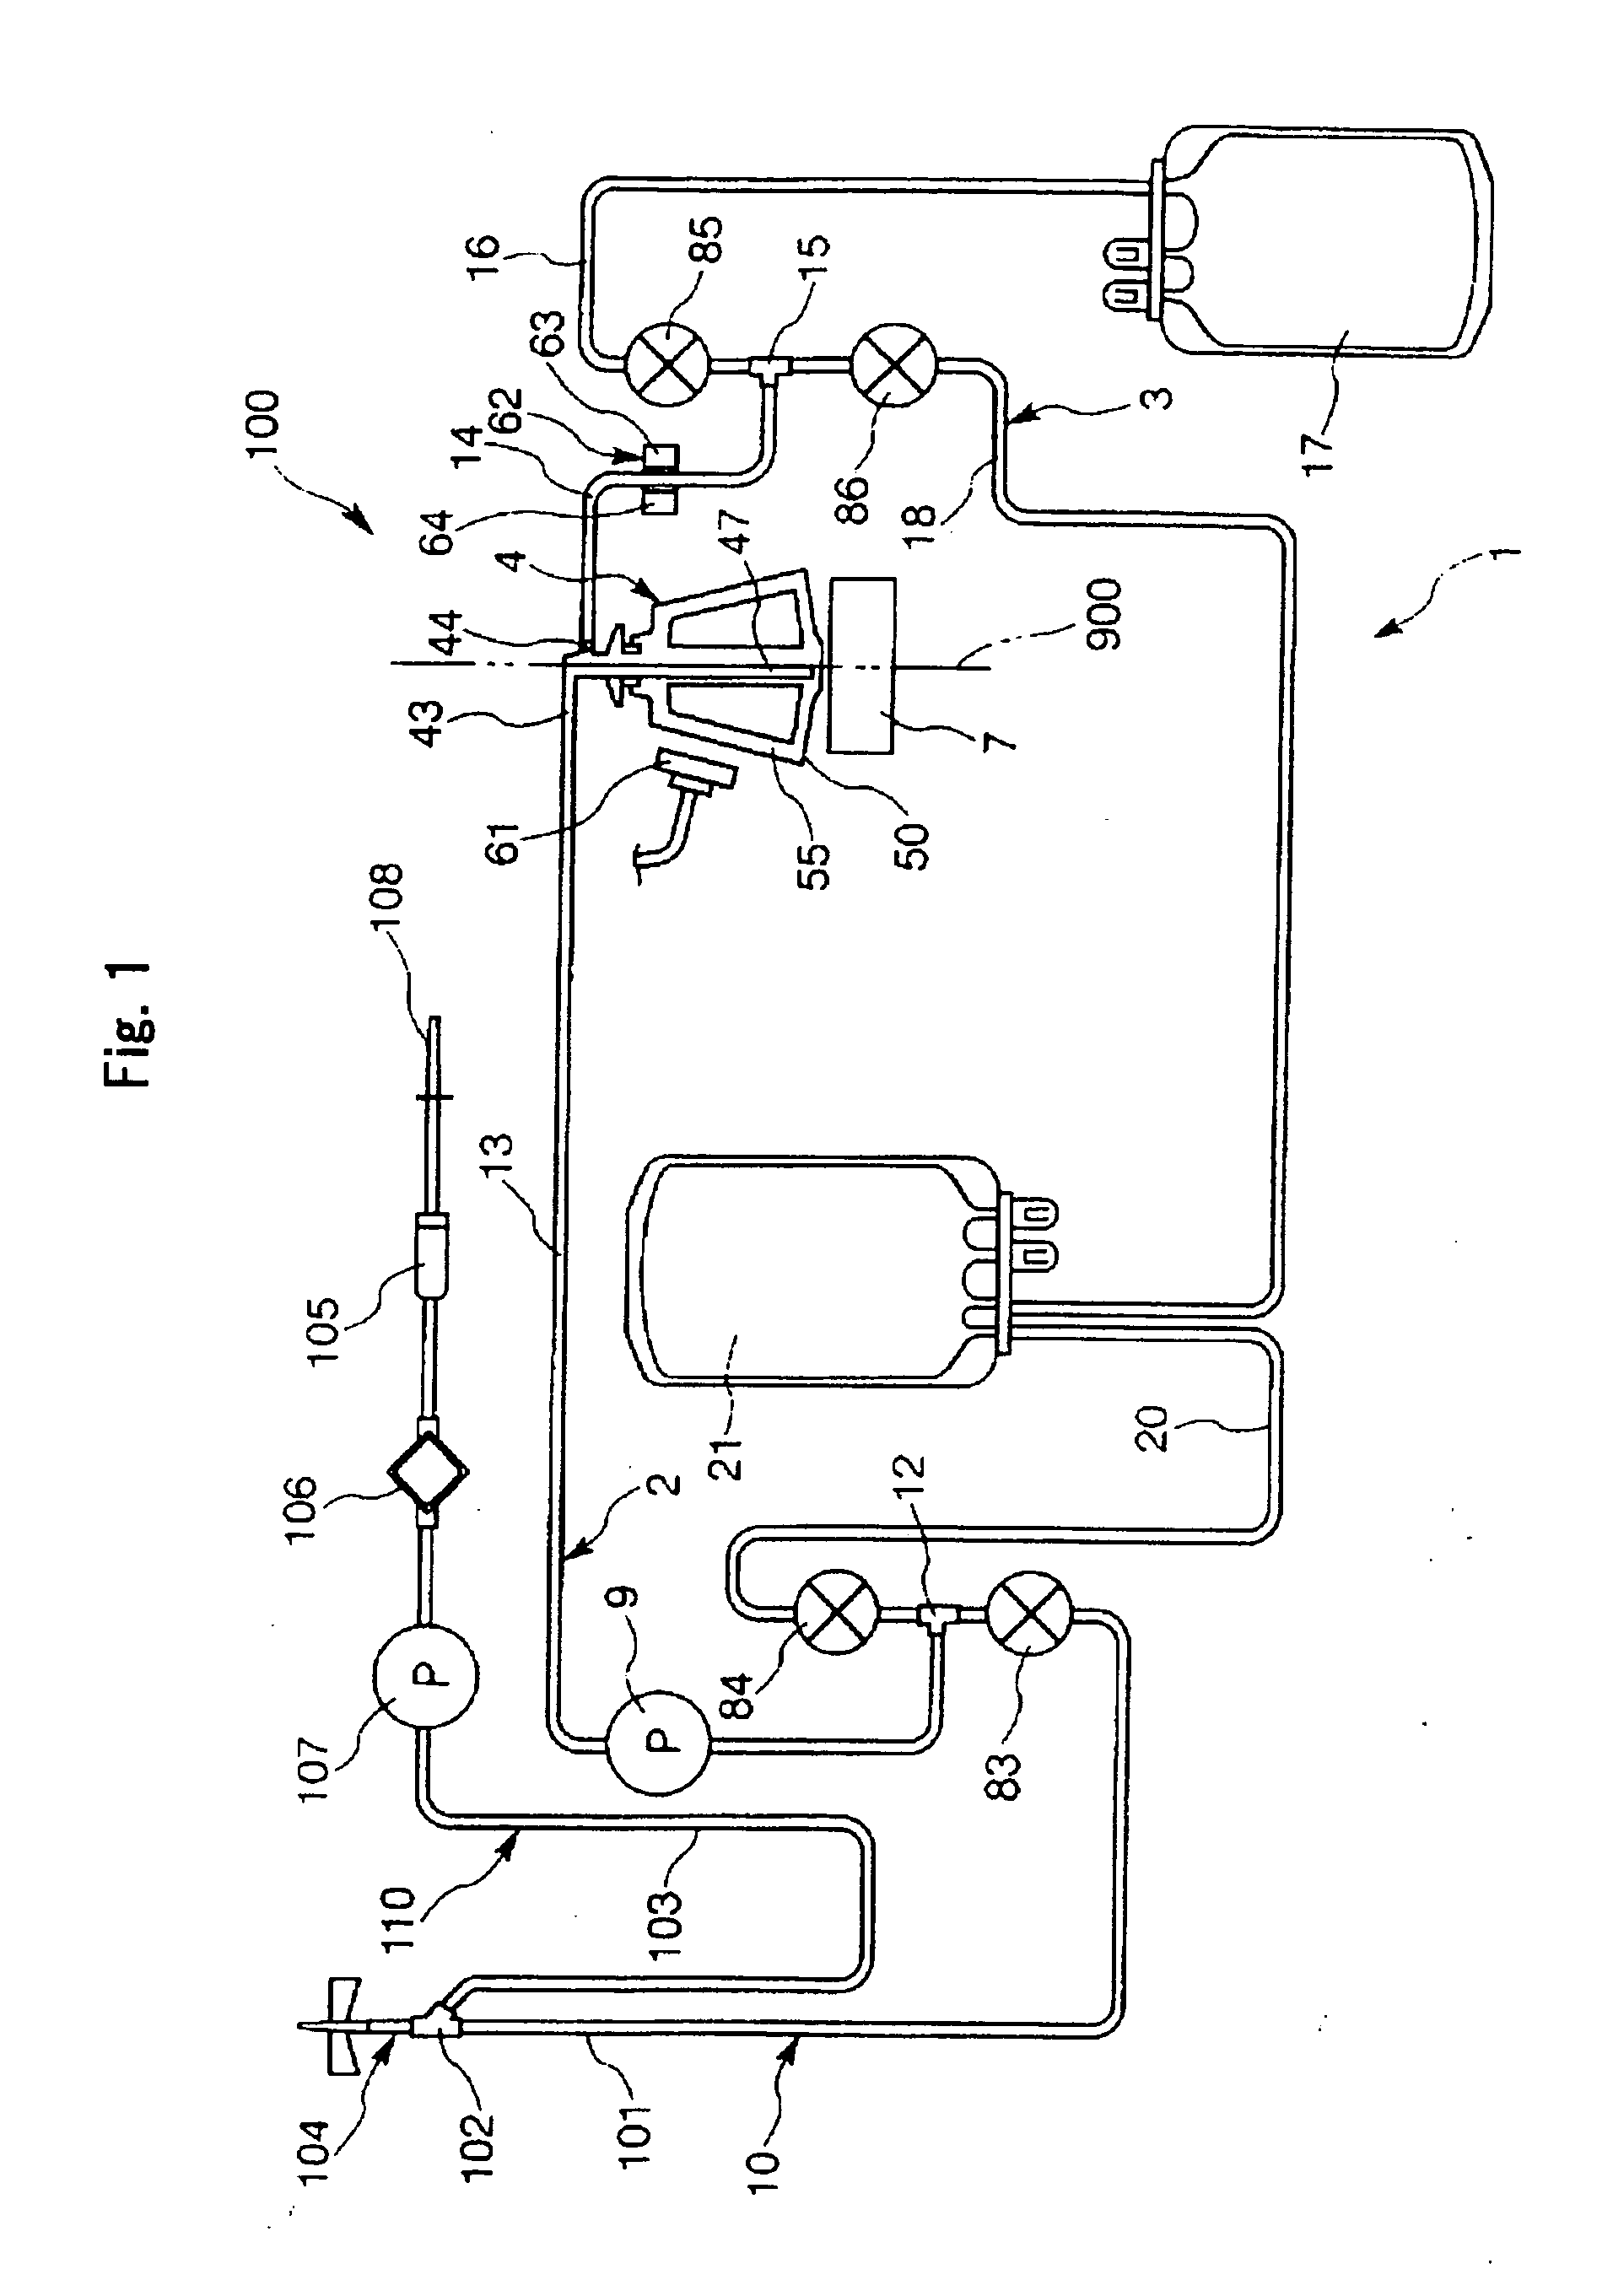 Autonomic nervous activity monitor, blood processing apparatus, blood collecting apparatus and autonomic nervous activity monitoring method